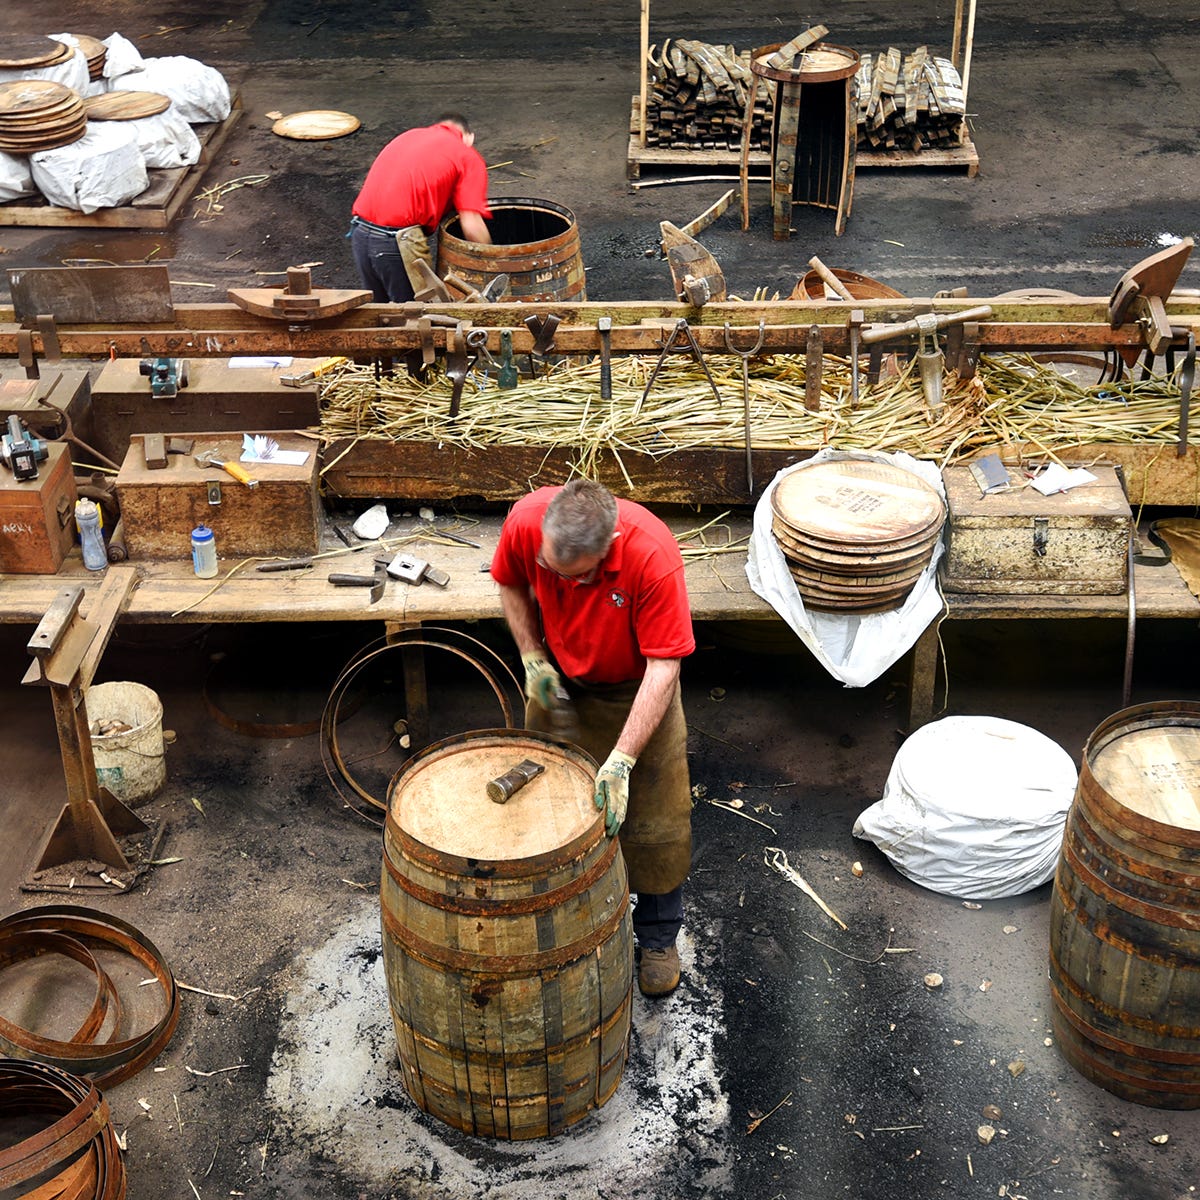 Workers at Scotland's Speyside Cooperage fashion oak casks for aging Scotch whisky.